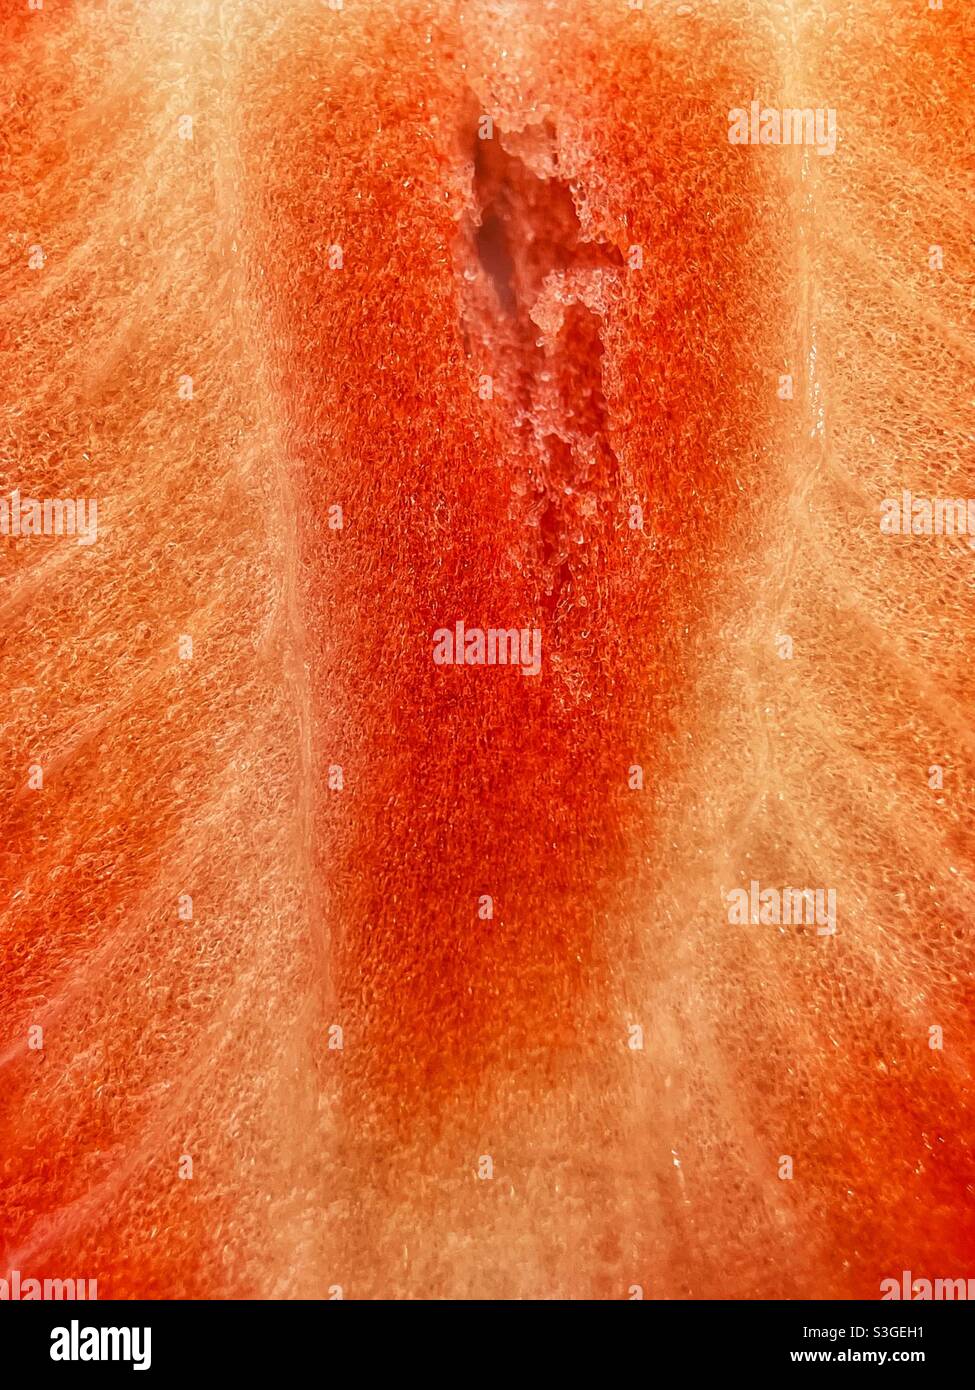 Macro view of the flesh of a strawberry Stock Photo